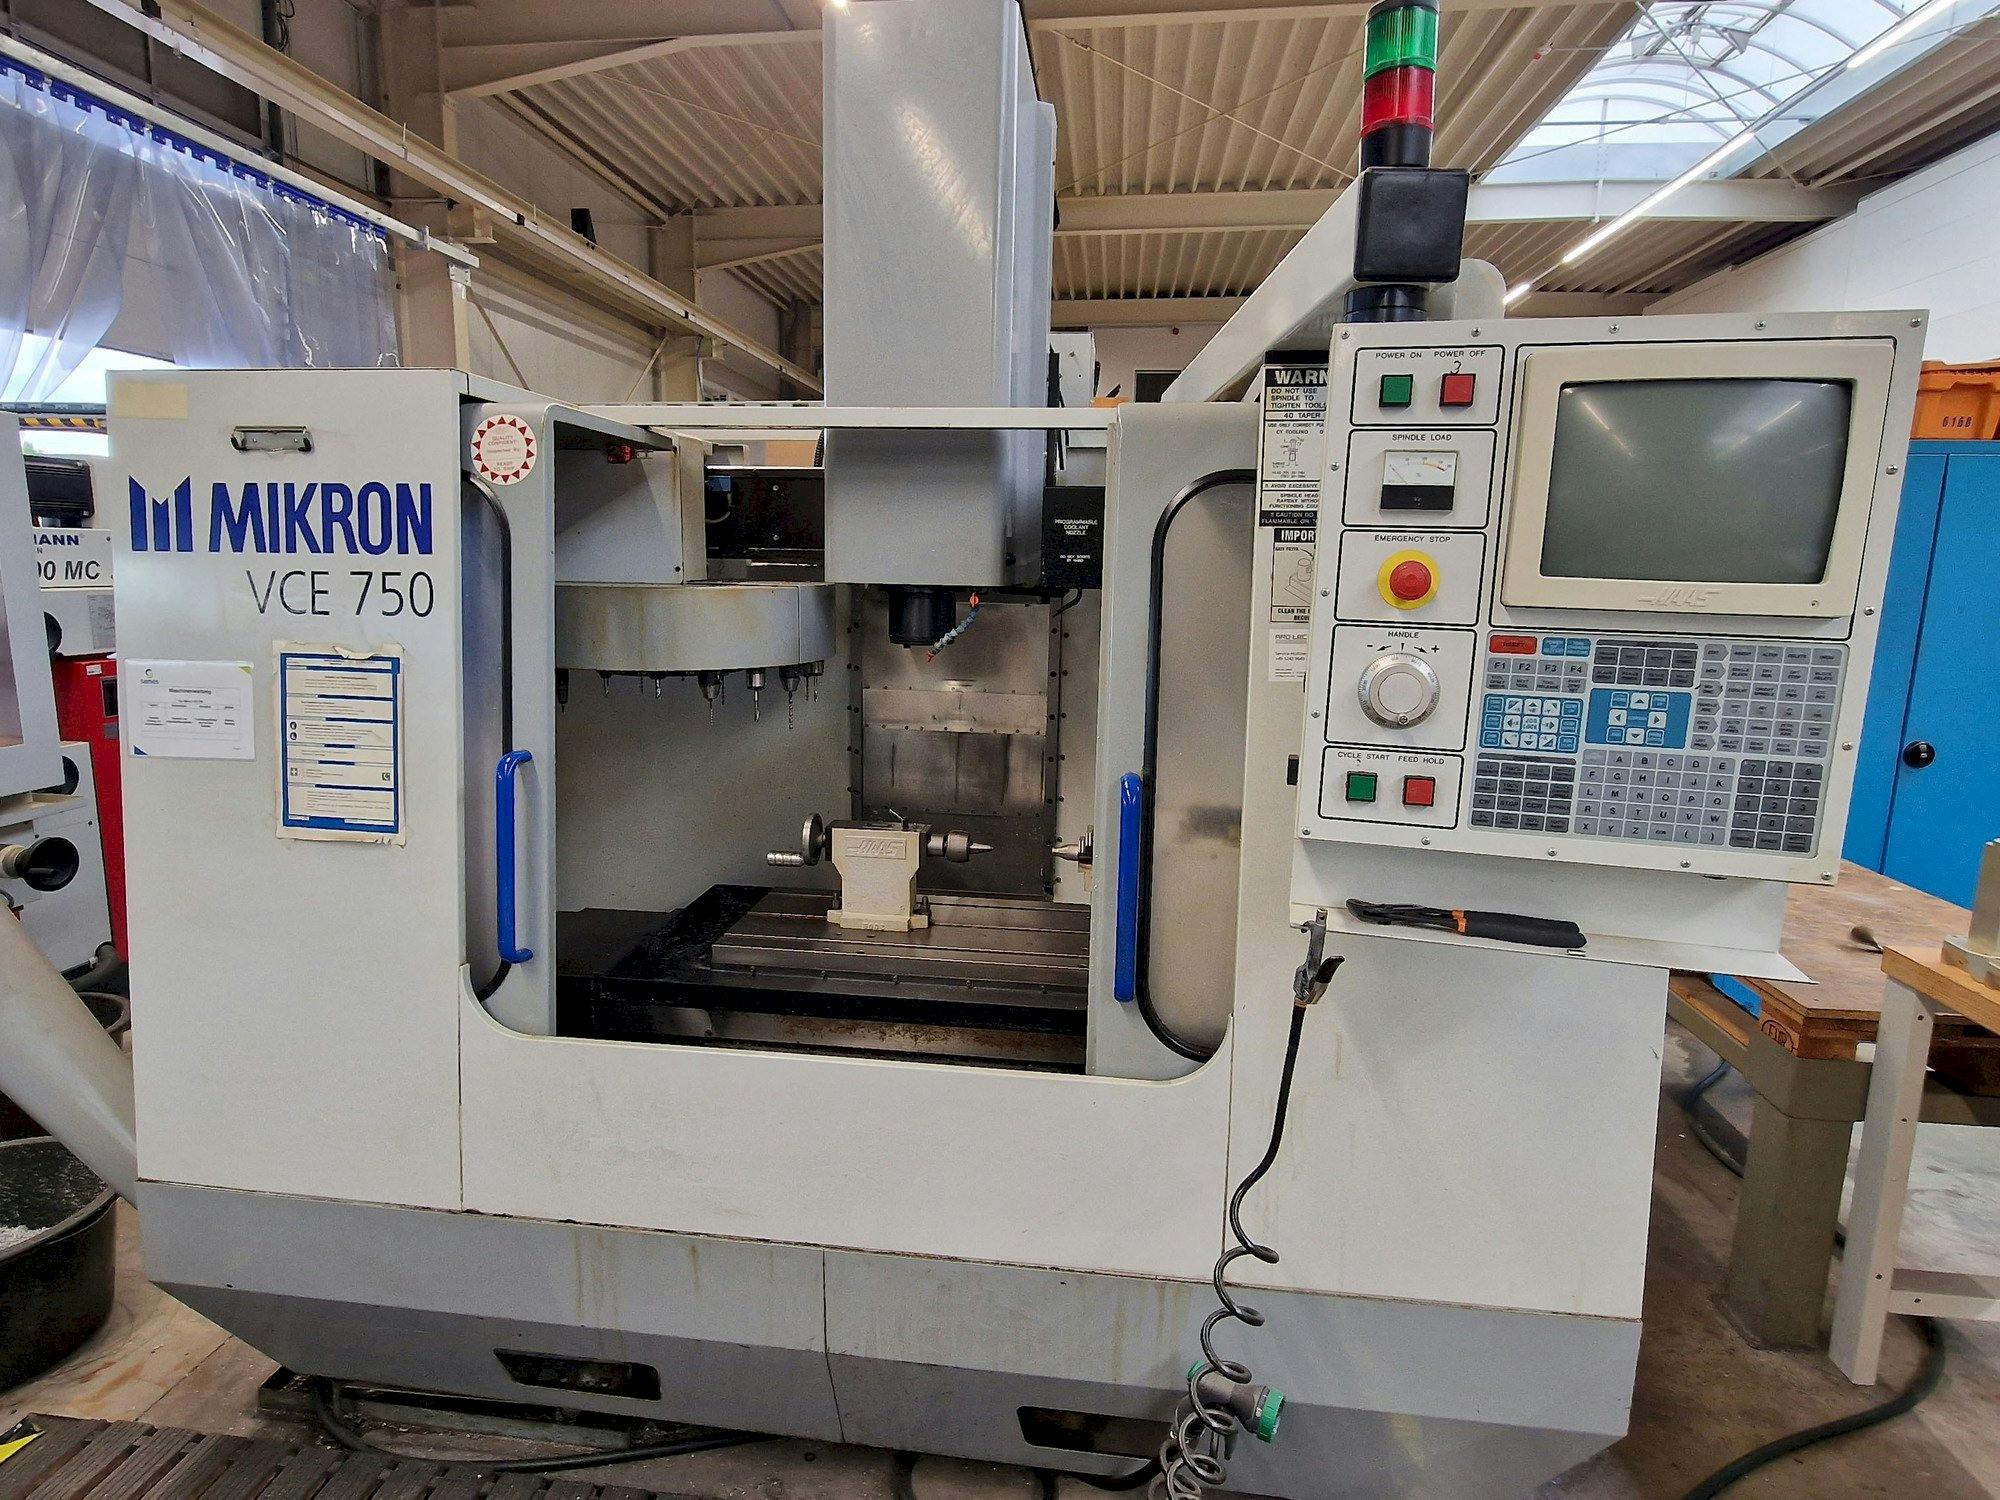 Front view of MIKRON Vce 750  machine